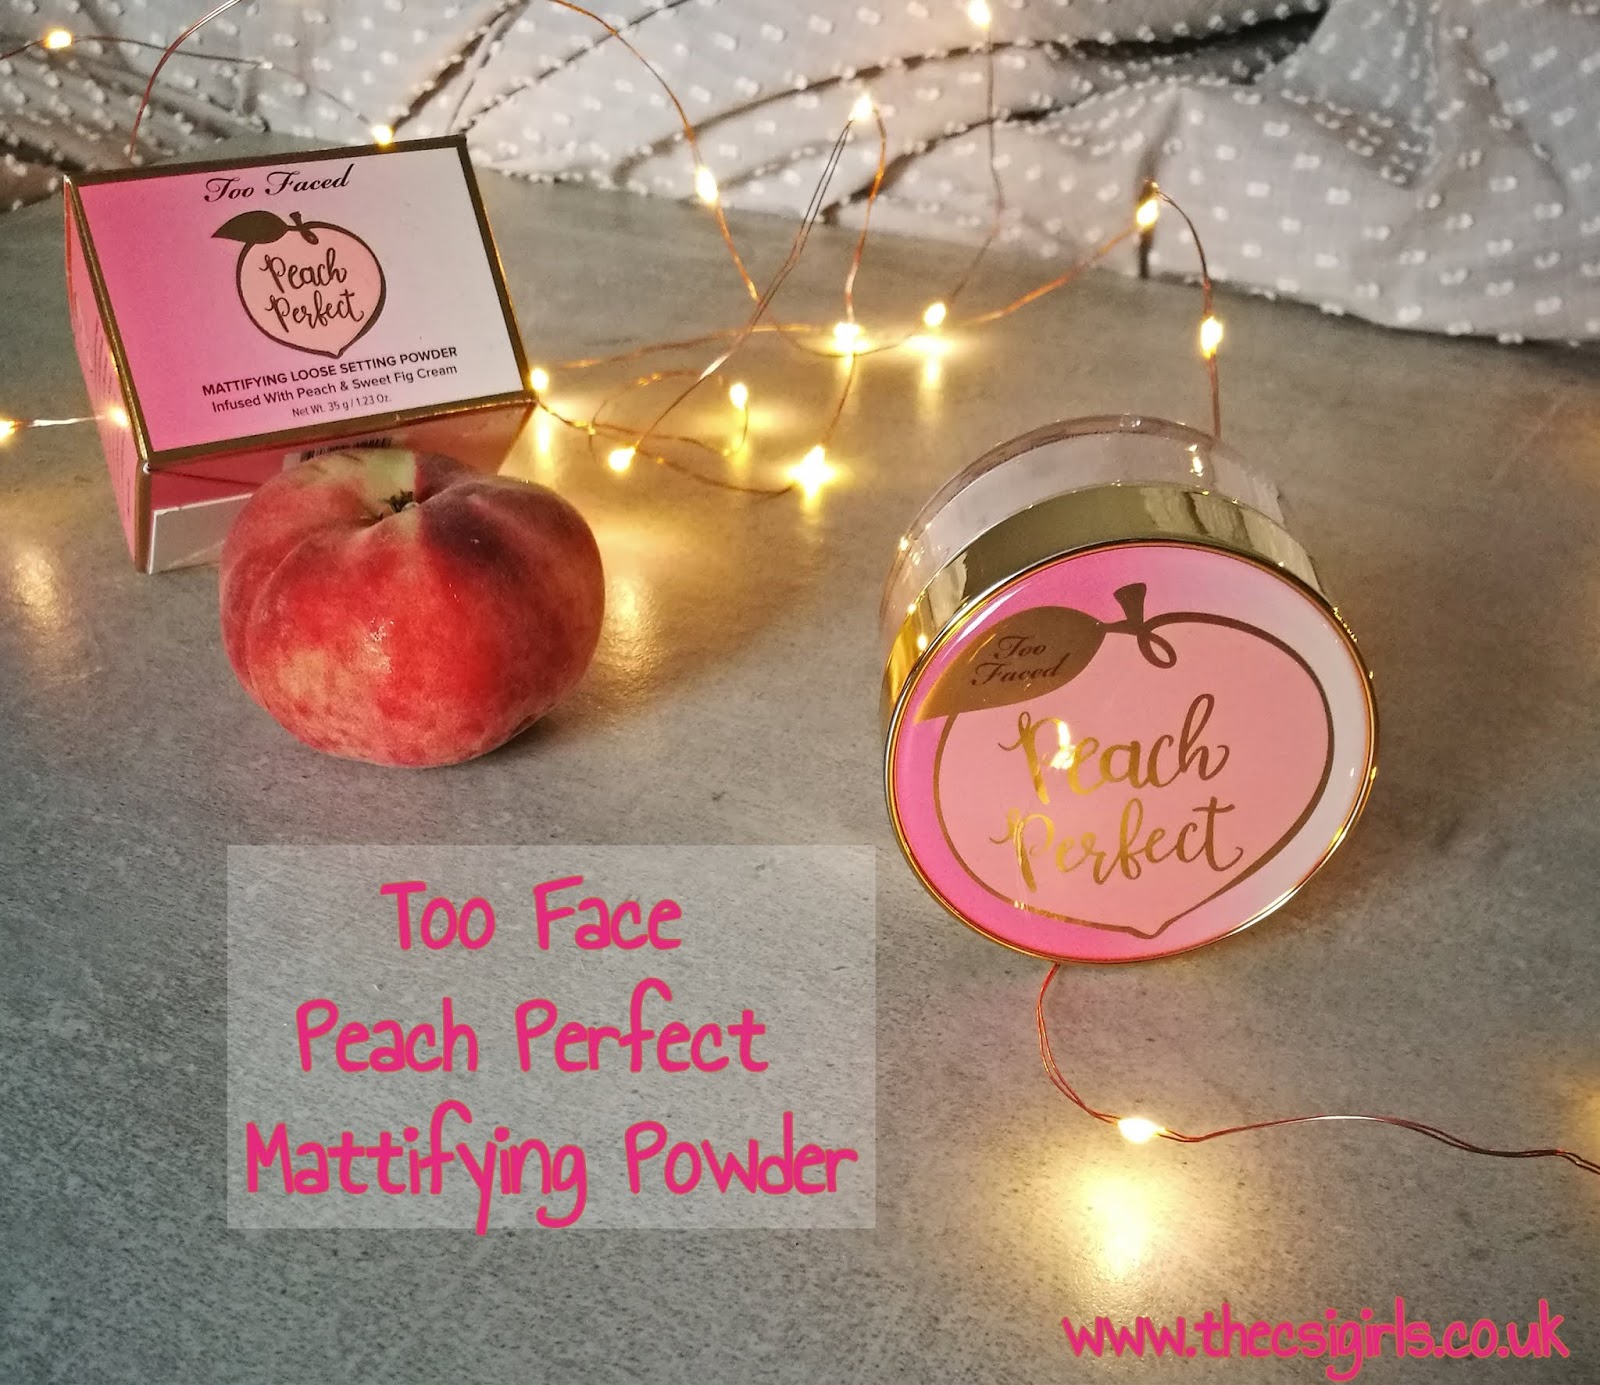 Beauty: Too Faced Peach Perfect Mattifying Loose Setting Powder